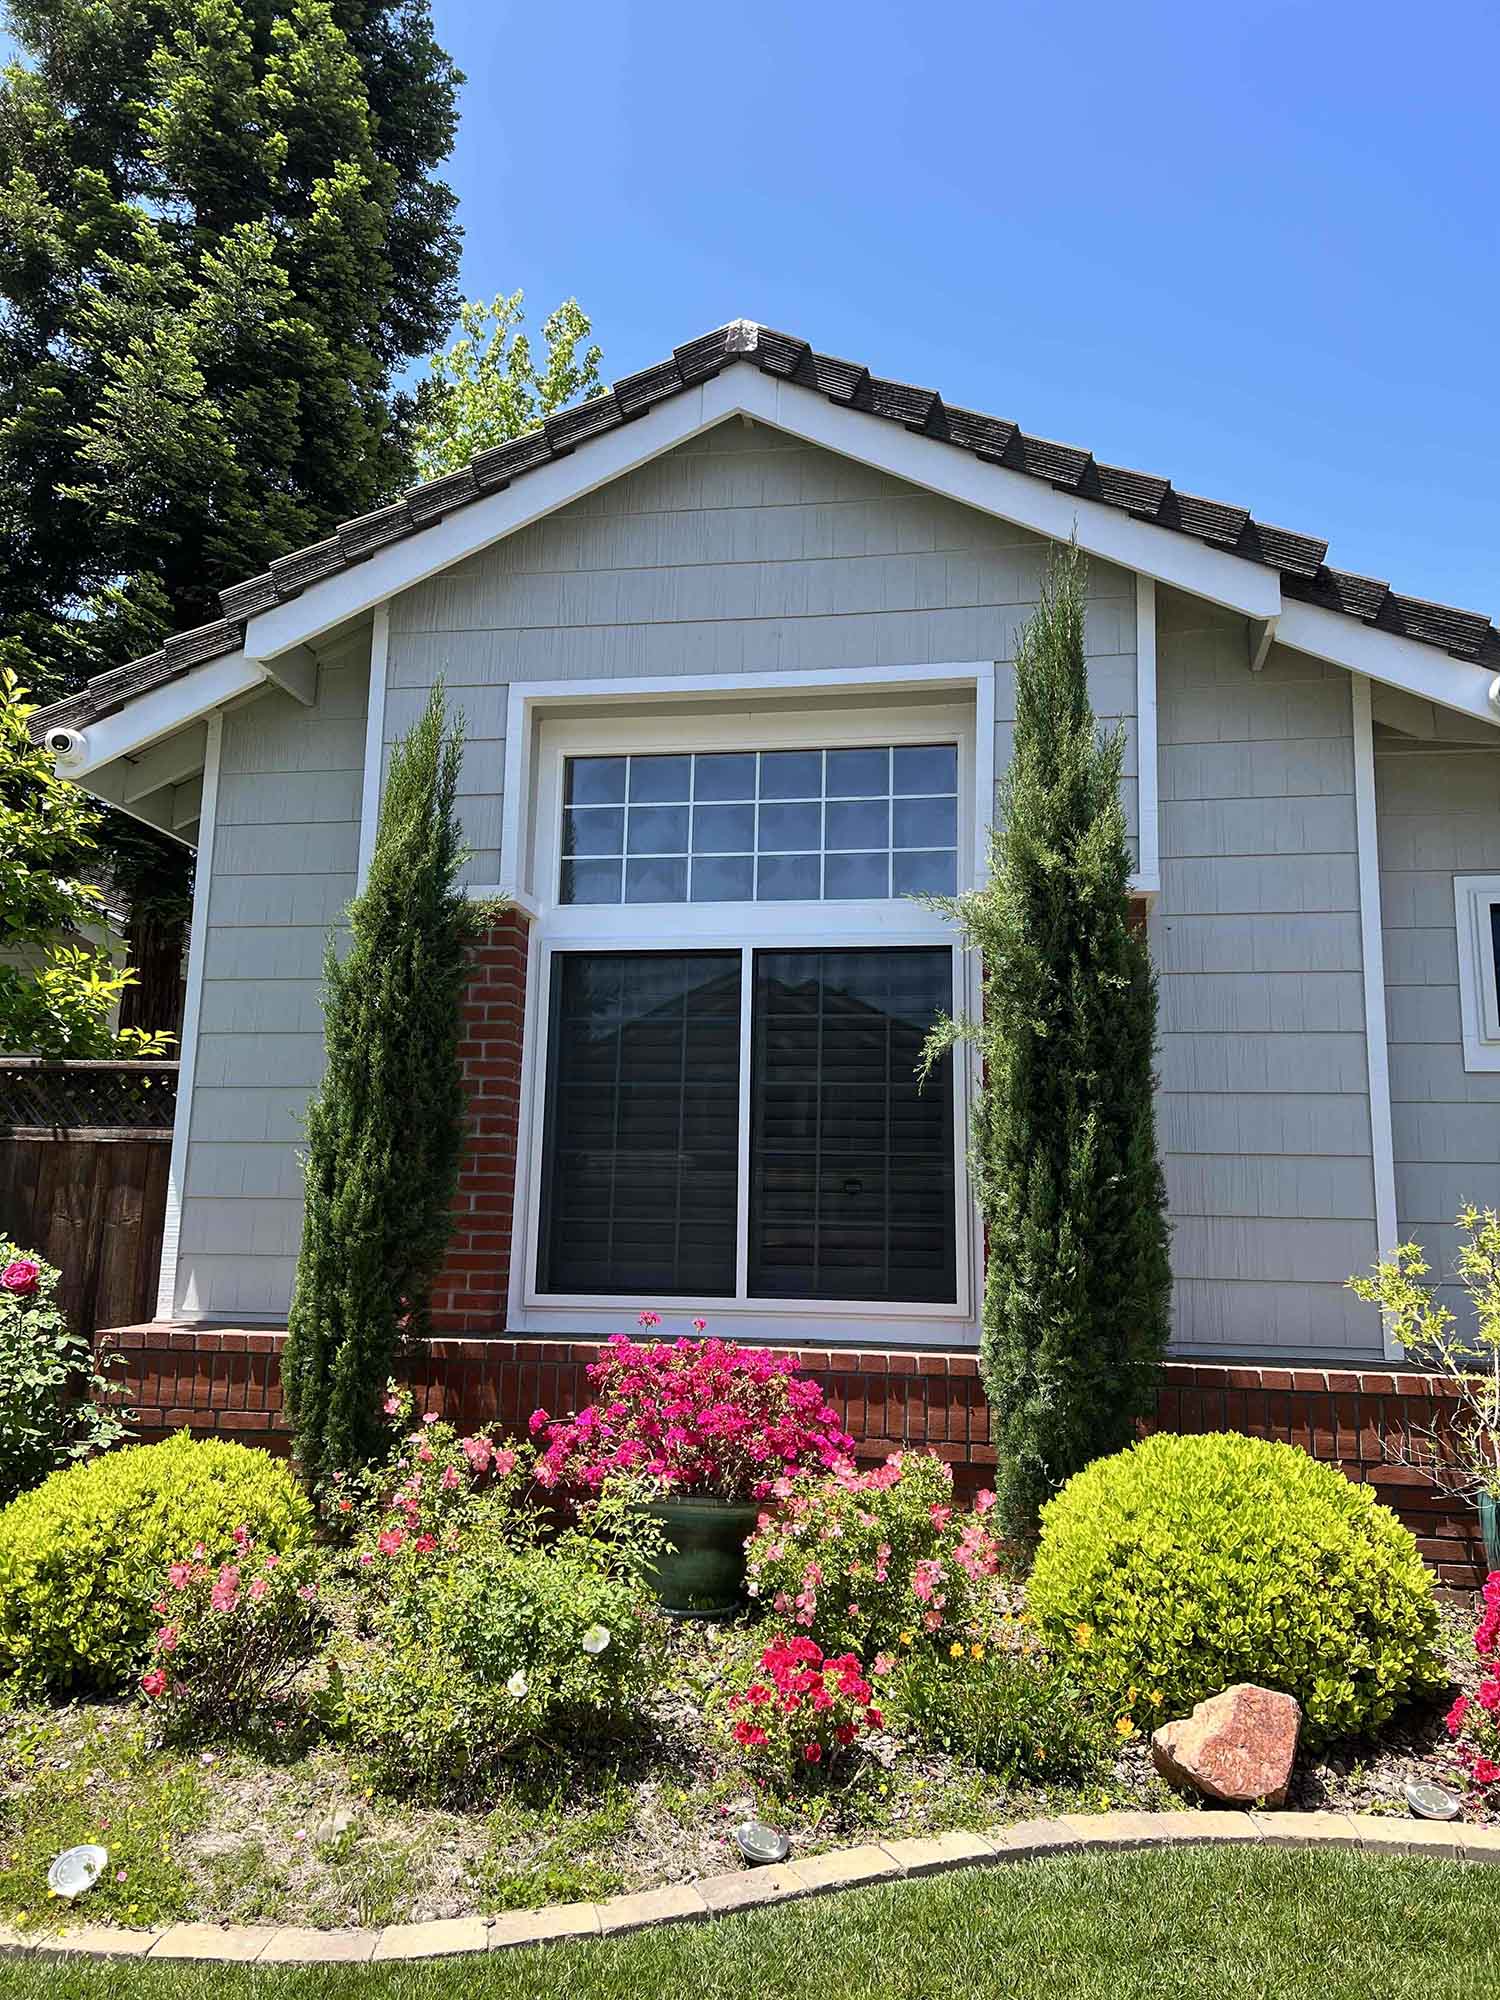 ClimatePro Secures Your Pleasanton Home with Crimsafe Security Screens. Get a free estimate for your Contra Costa County Home. Serving Danville, Pleasanton and San Ramon.